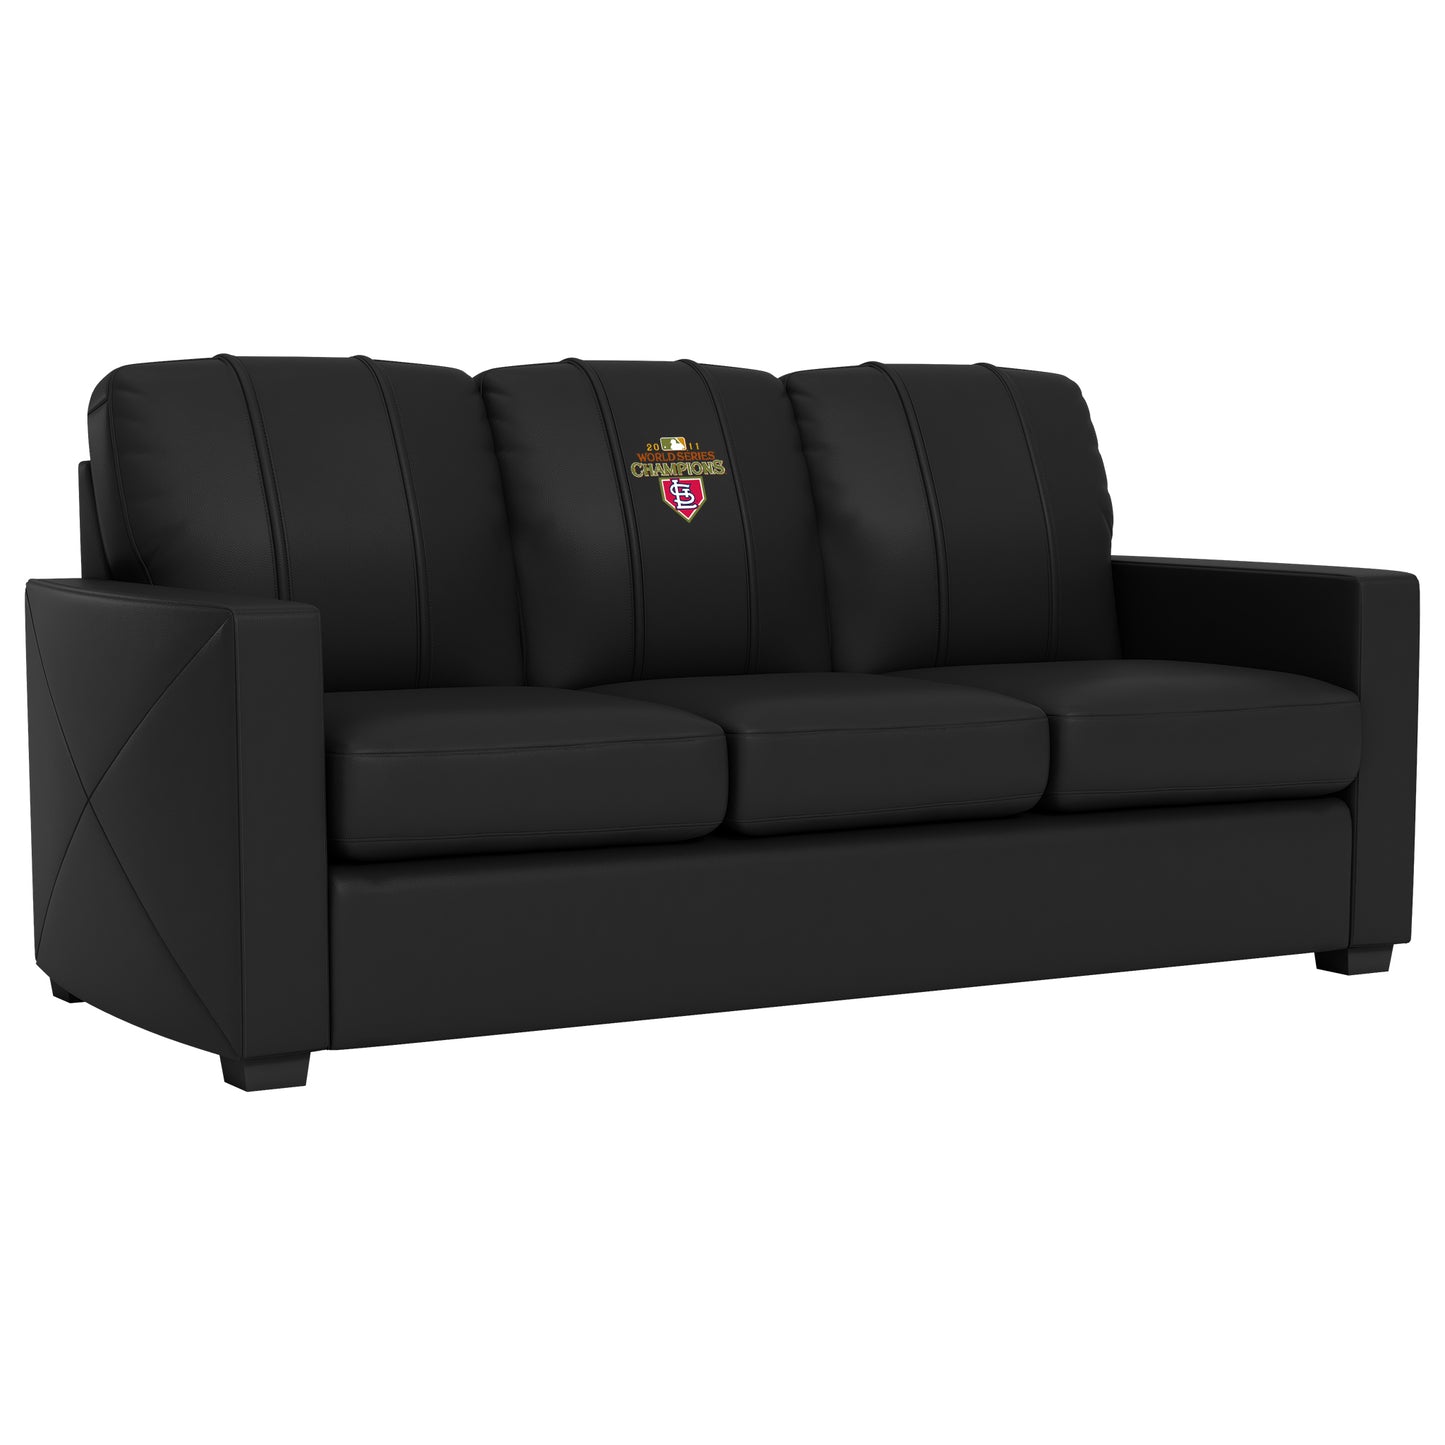 Silver Sofa with St Louis Cardinals Champs 2011